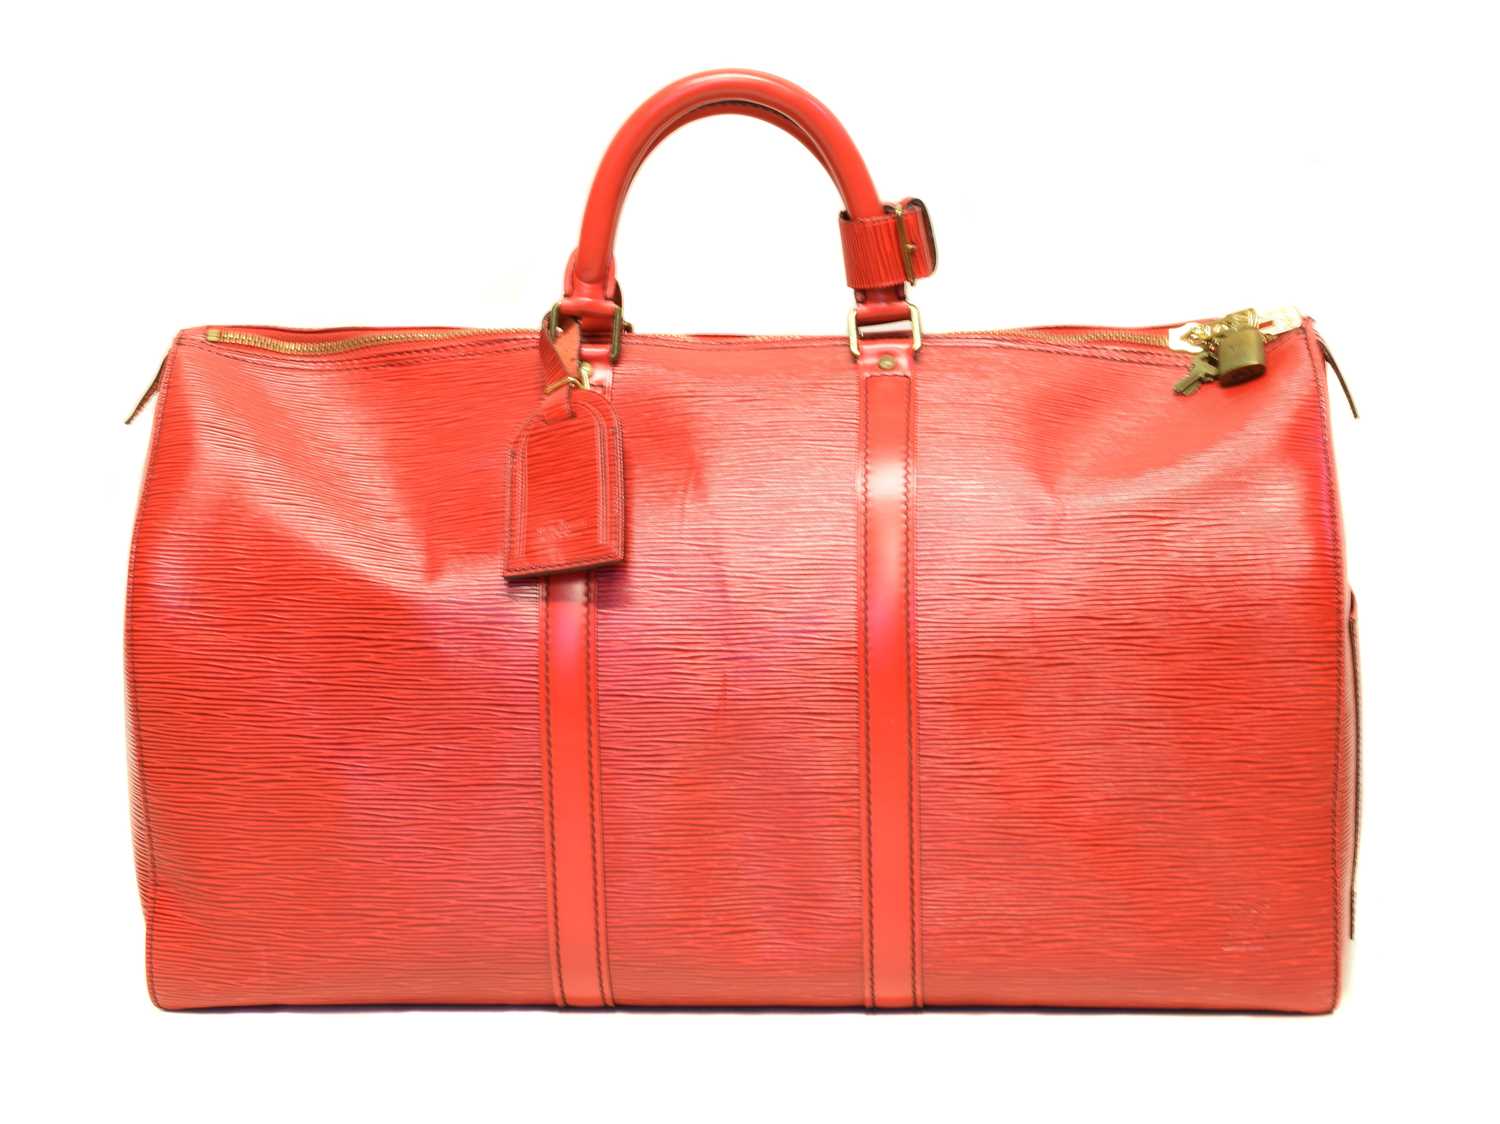 Lot 47 - A Louis Vuitton red Epi Keepall 50 luggage bag